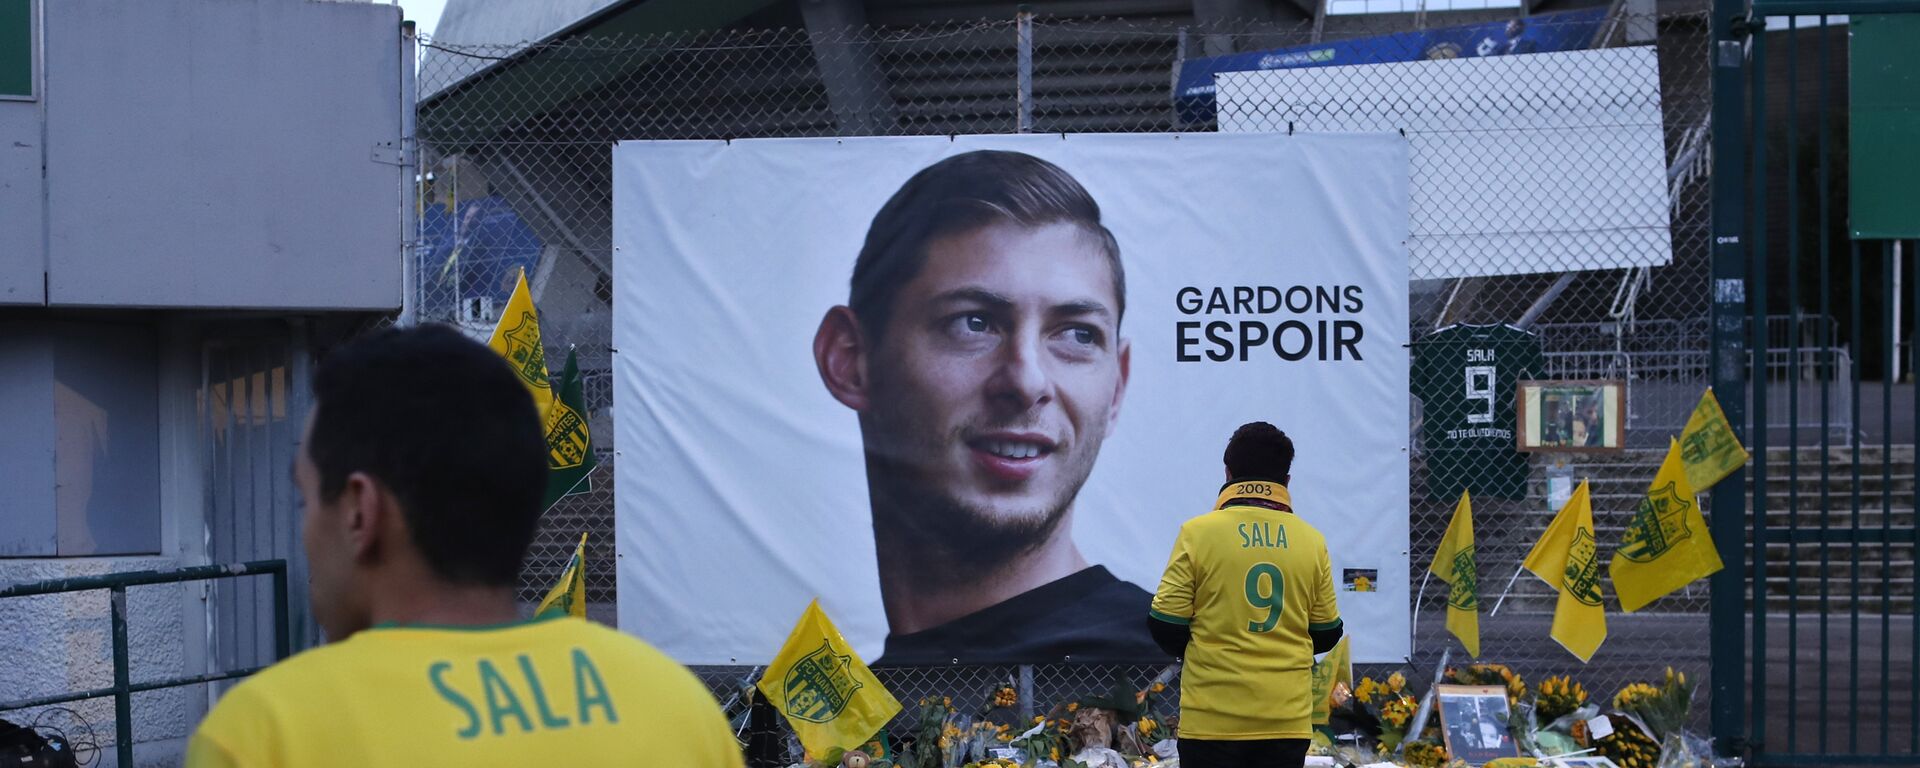 Nantes soccer team supporters stand by a poster of Argentinian player Emiliano Sala and reading Let's keep hope outside La Beaujoire stadium before the French soccer League One match Nantes against Saint-Etienne, in Nantes, western France, Wednesday, Jan.30, 2019 - Sputnik International, 1920, 12.11.2021